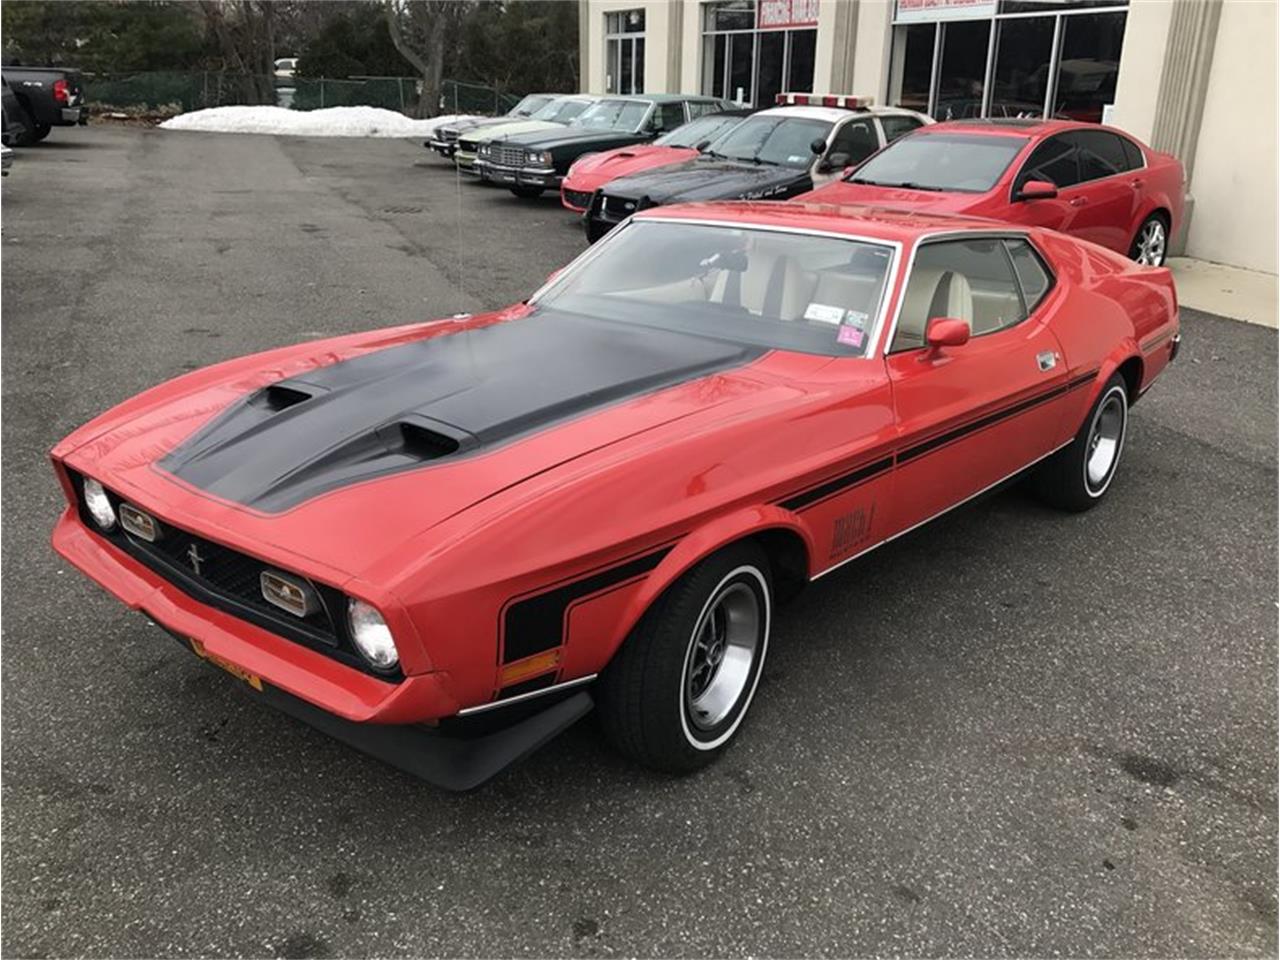 1971 Ford Mustang Mach 1 for Sale | ClassicCars.com | CC-1058563